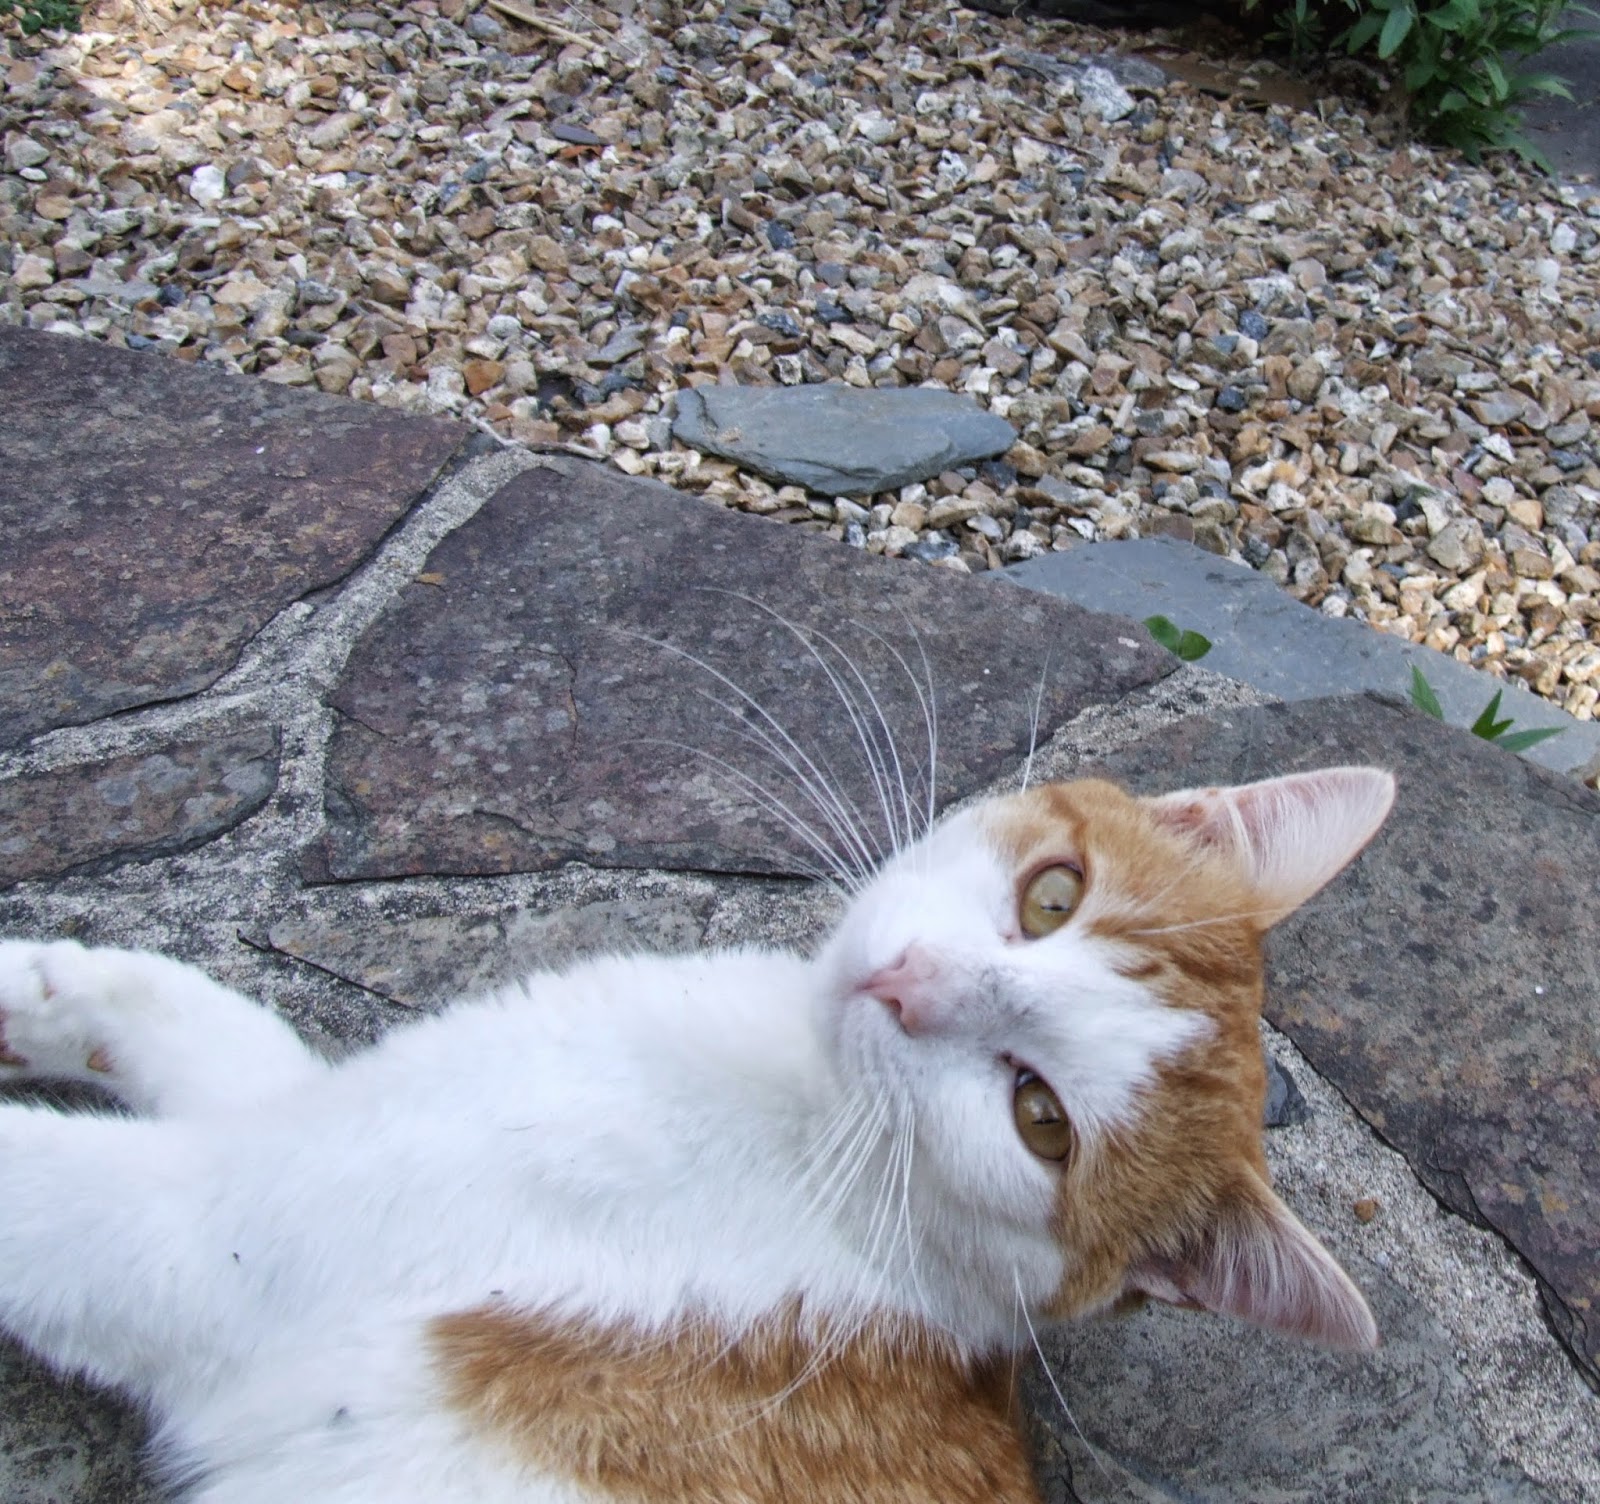 Under The Paw: Plus points of taking in a stray cat